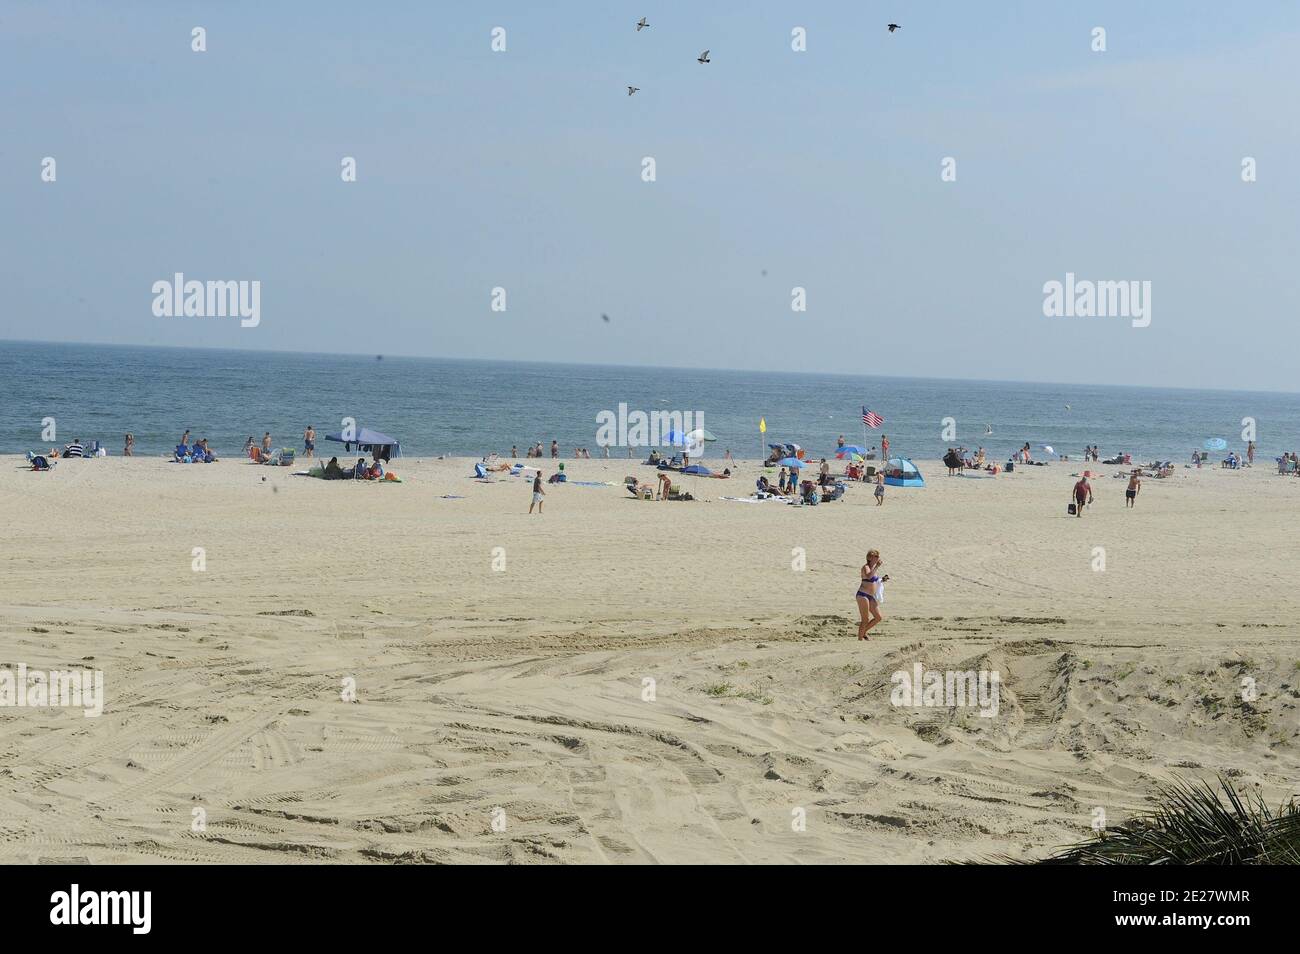 Removal of palm trees and other items from the beach at Pier Village along the New Jersey Shore in preparation for the arrival of Hurricane Irene, Long Branch in New Jersey on August 26, 2011. Photo by Graylock/ABACAPRESS.COM Stock Photo